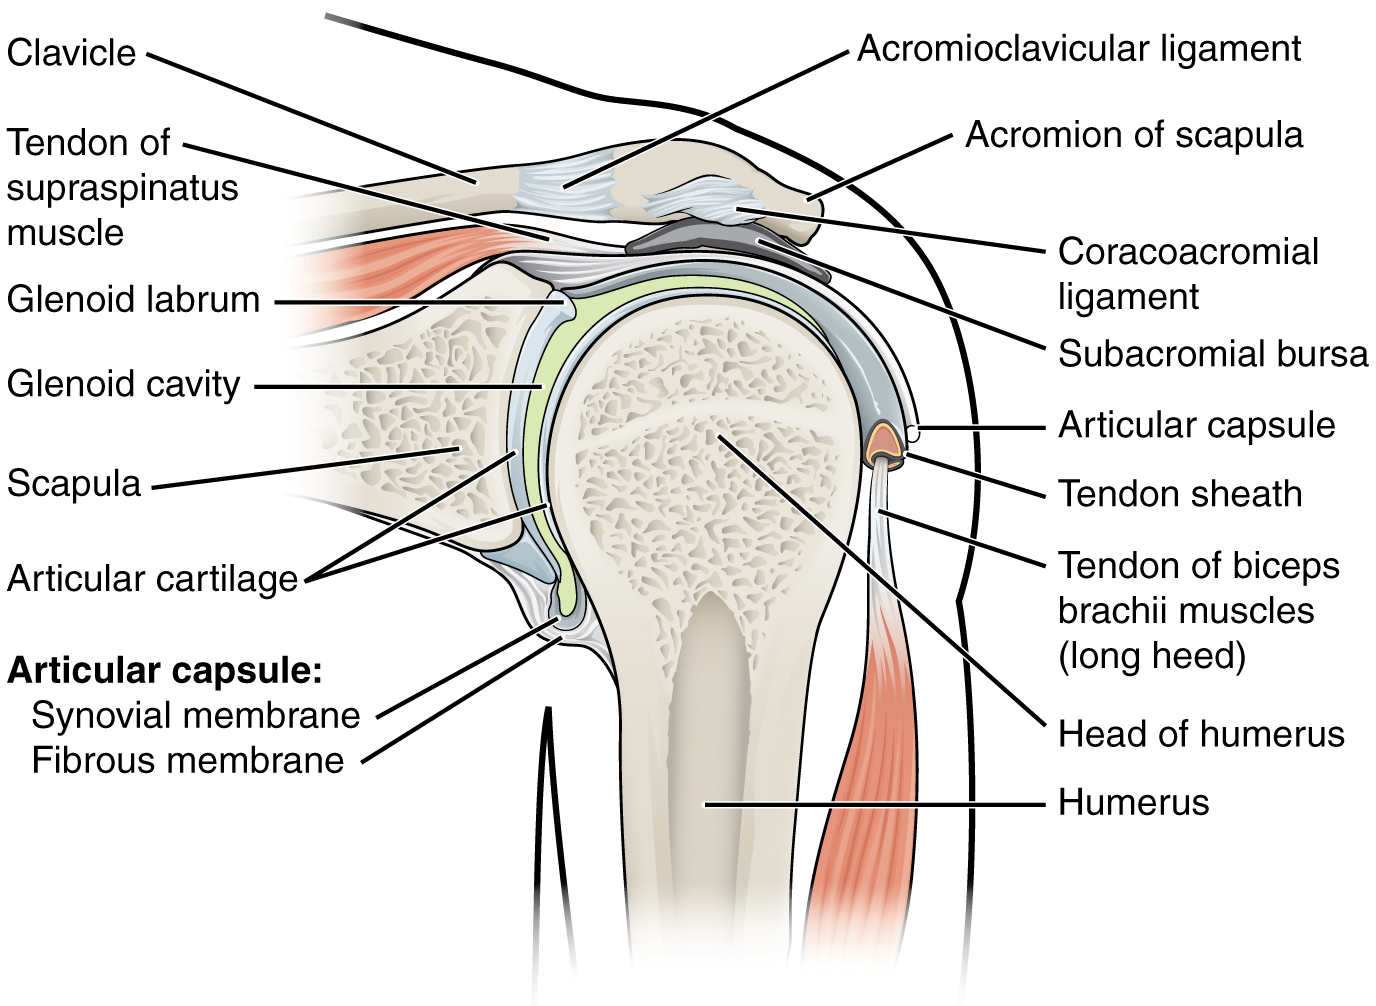 This figure shows the structure of the shoulder joint. The main